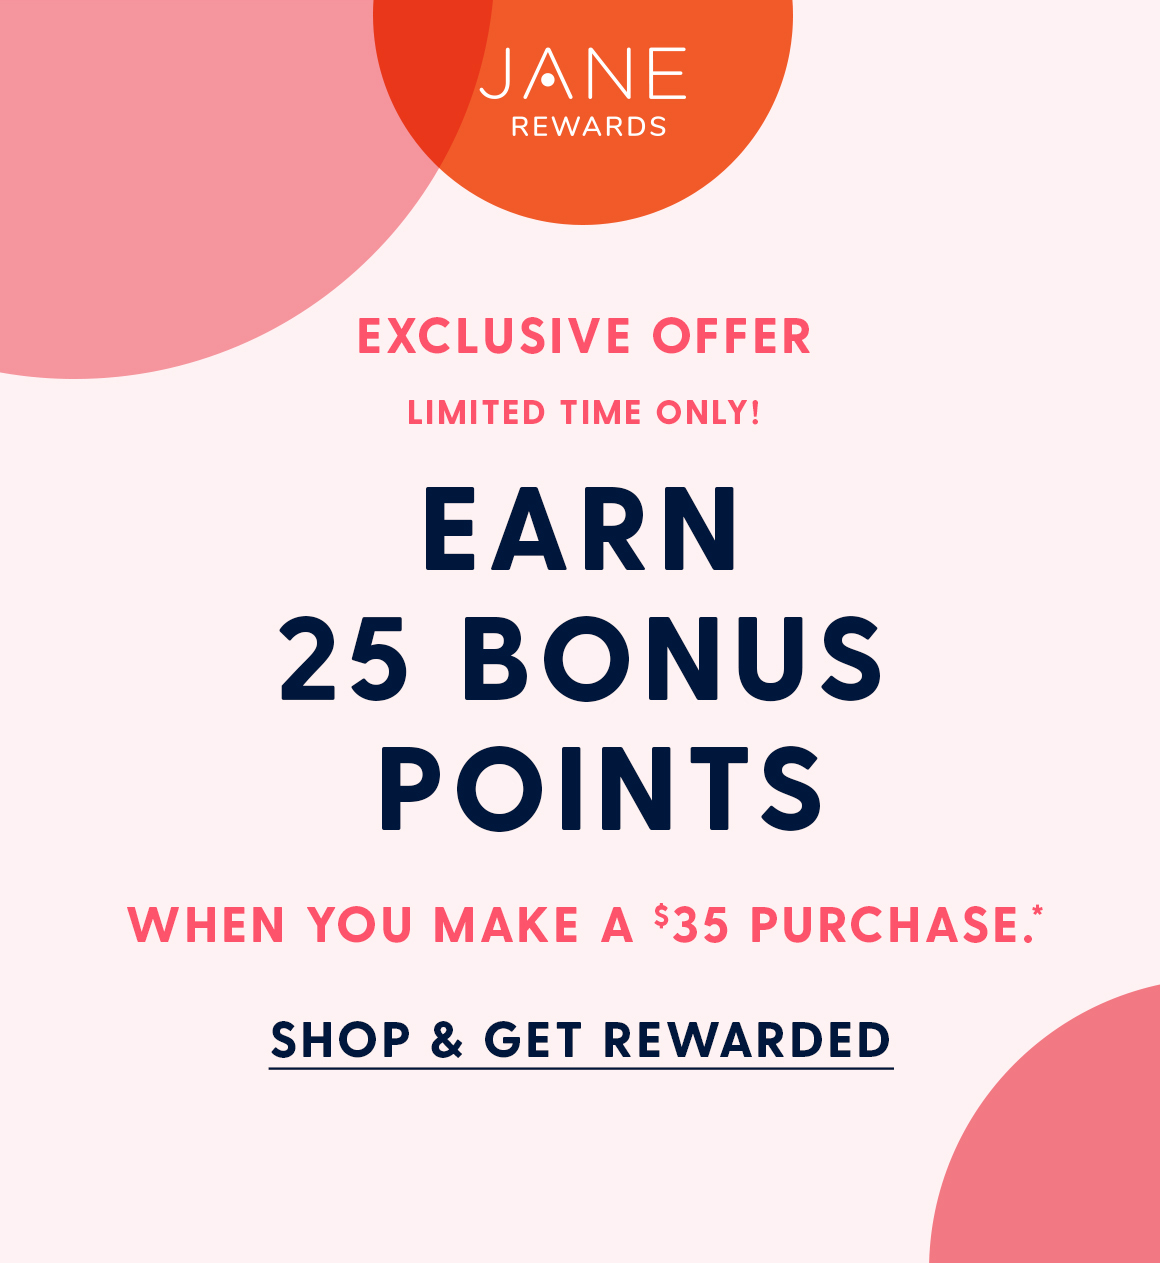 Exclusive Offer limited time only. Earn 25 bonus points when you make a $35 purchase. Shop & get rewarded. 